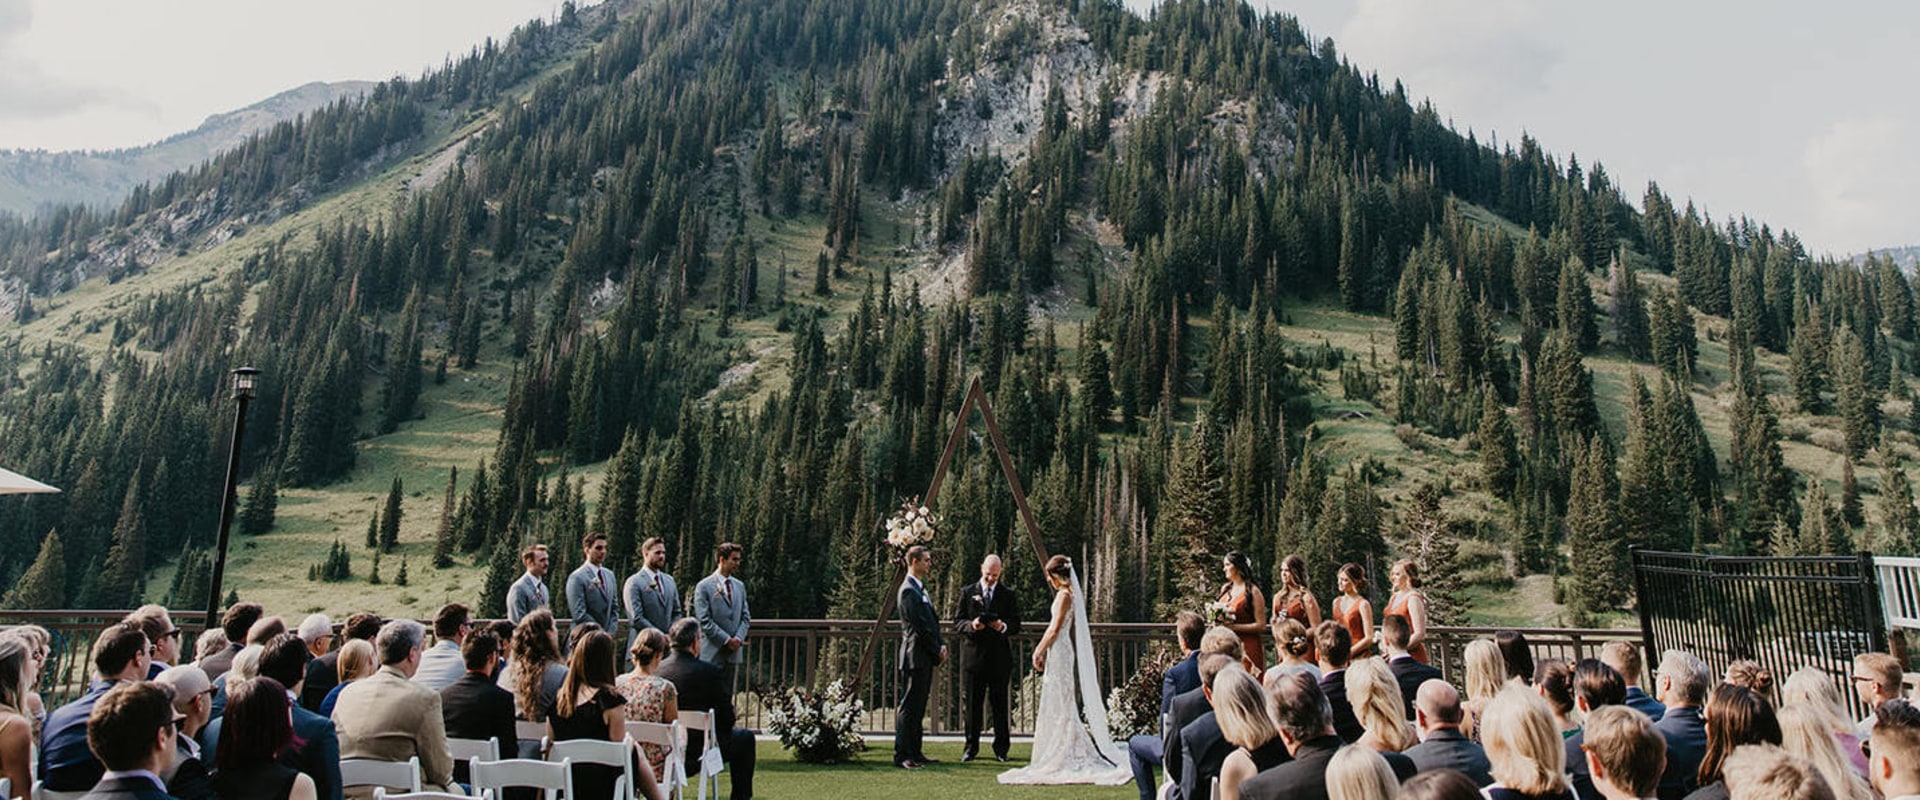 Captivating Mountain Weddings: A Guide to the Best Outdoor Venues in Arizona